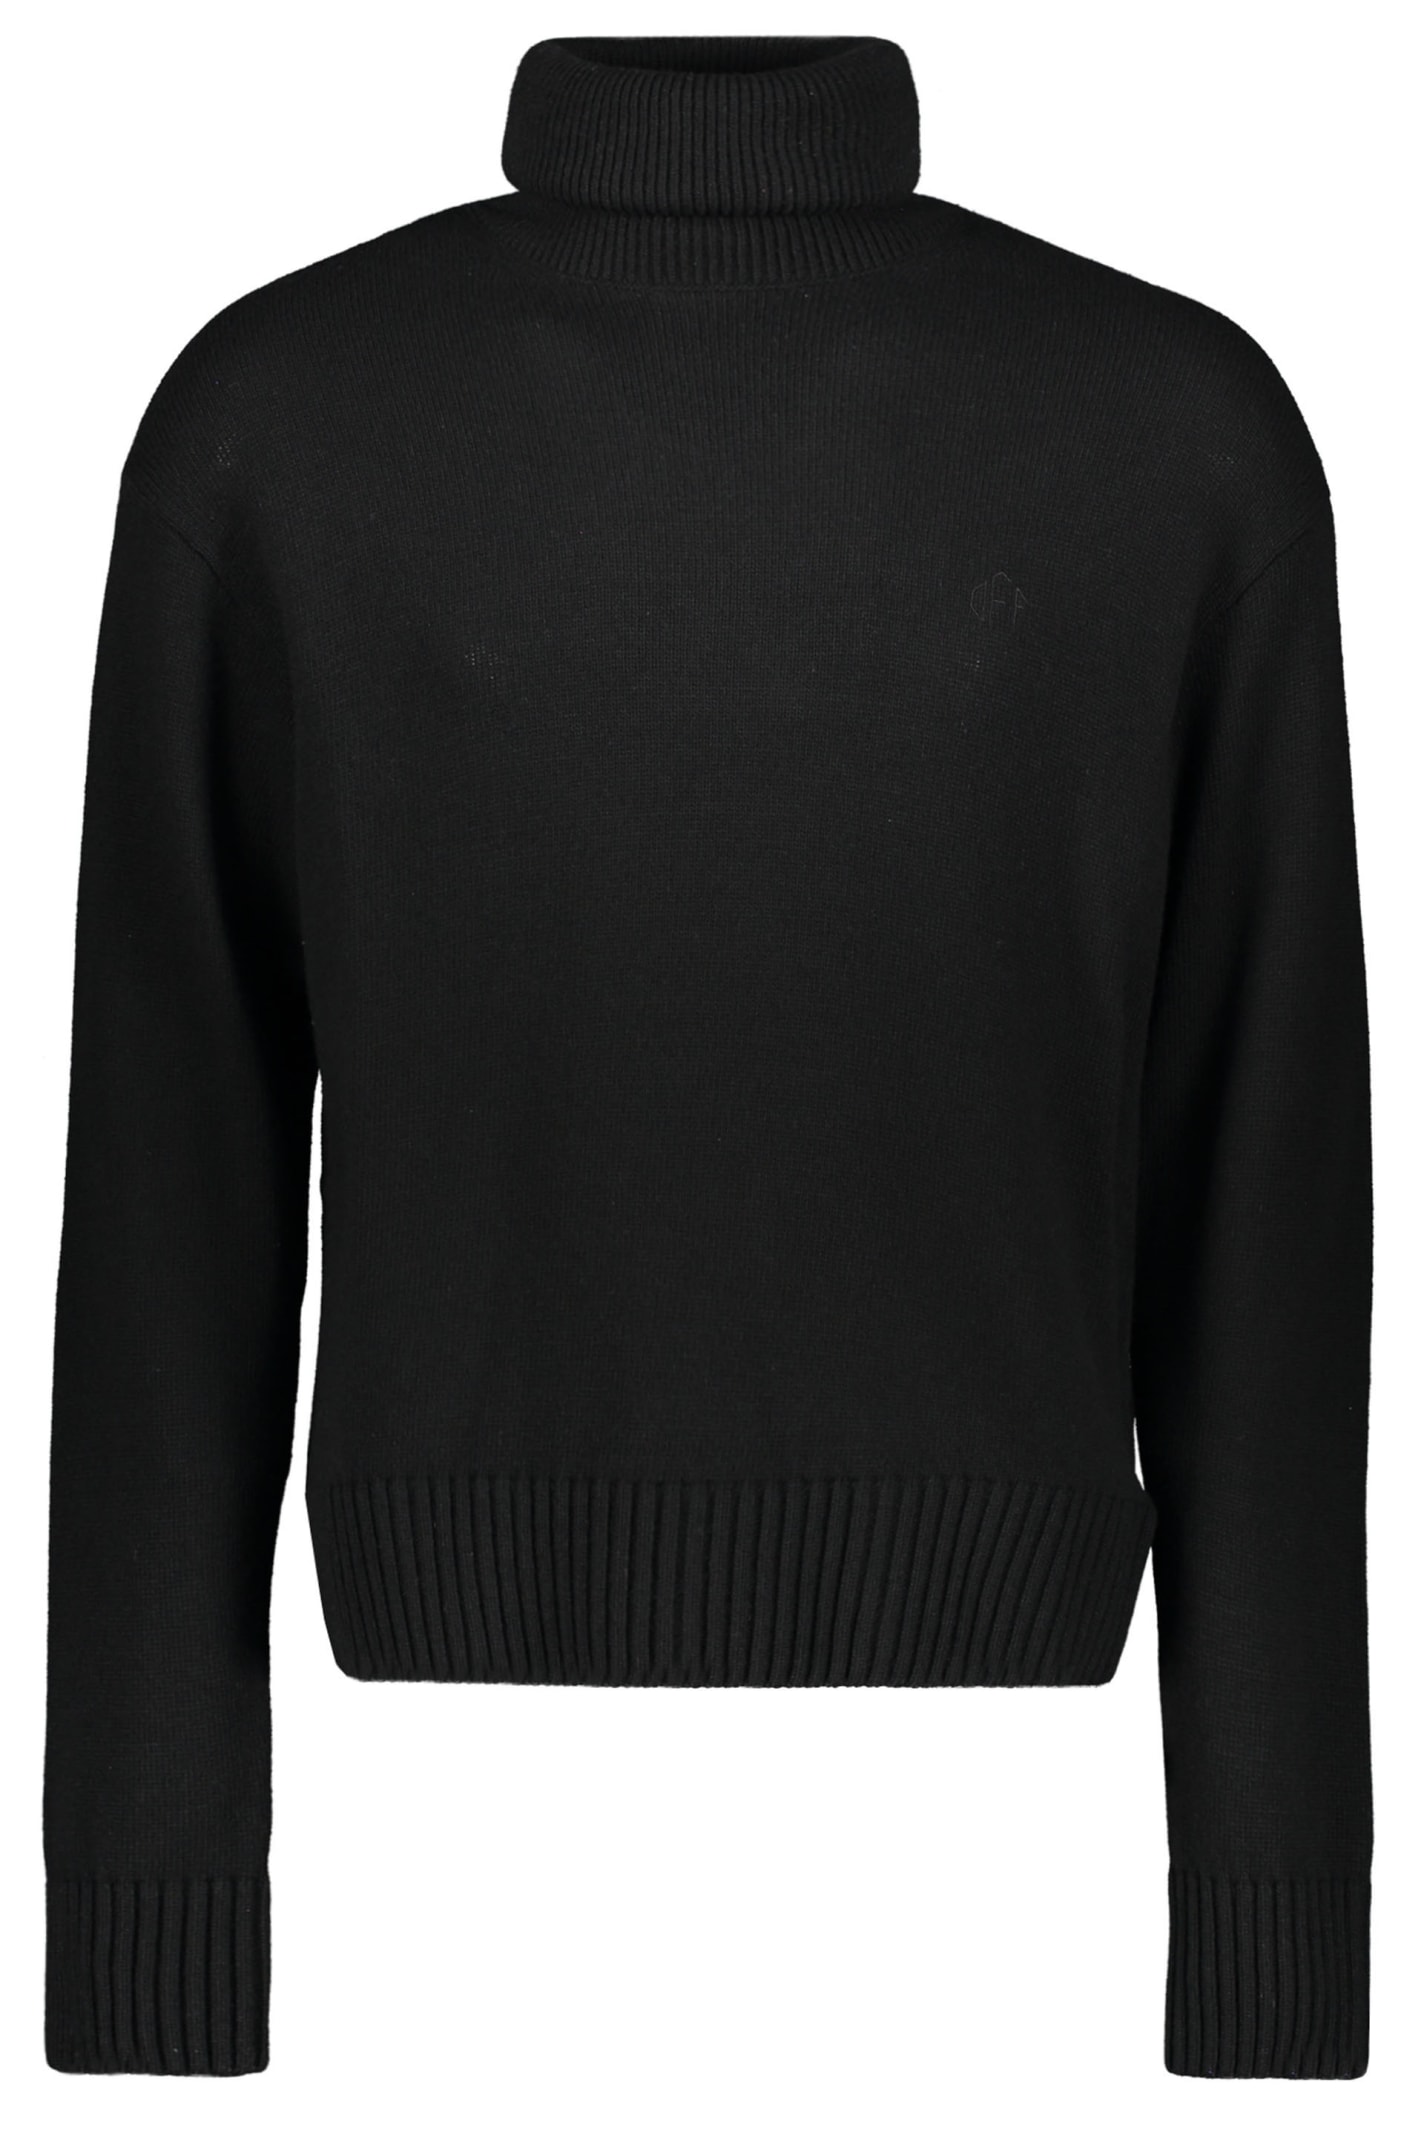 Off-white Turtleneck Sweater In Black